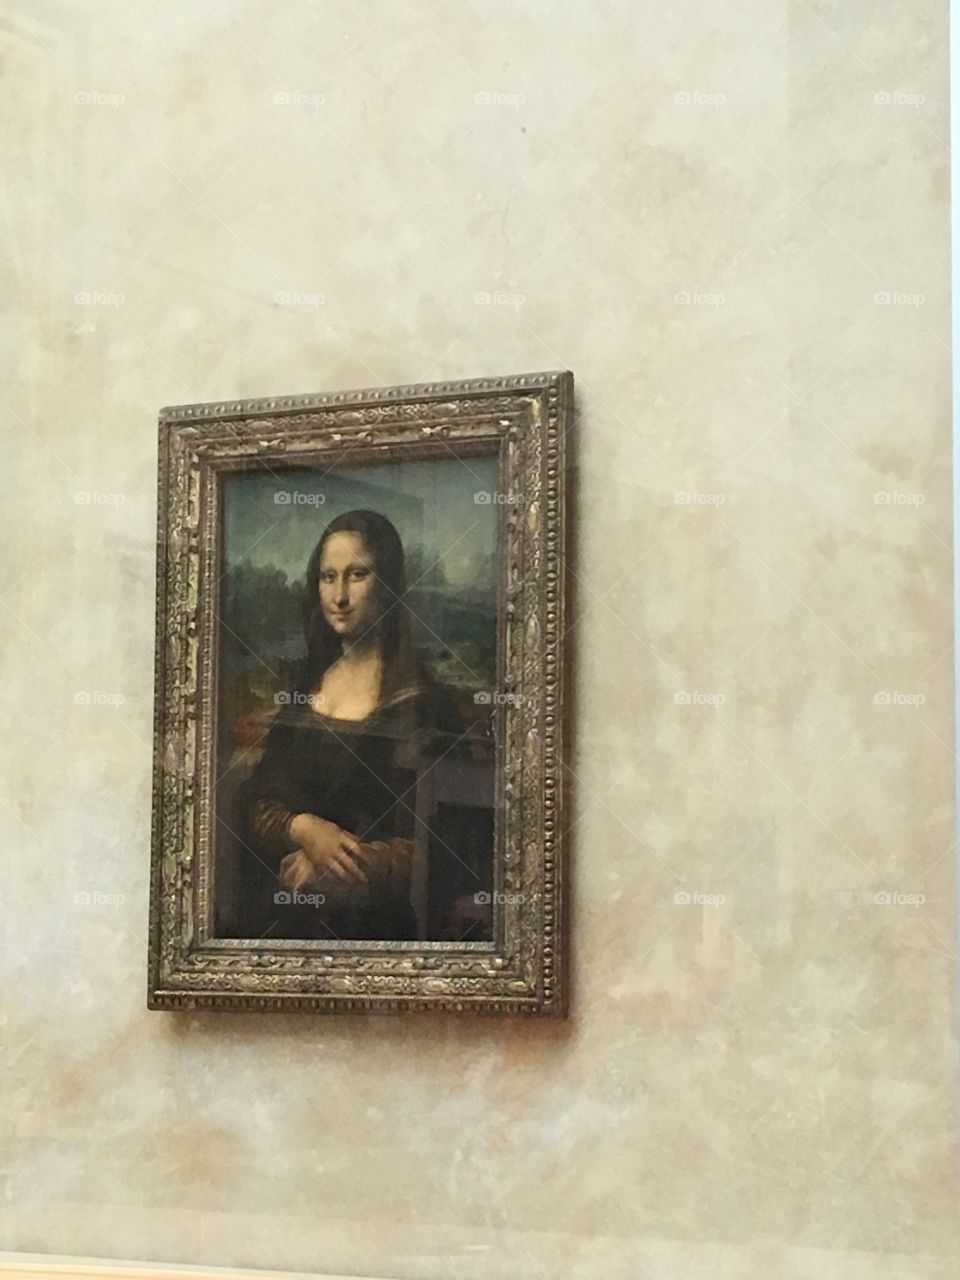 Does this amazing Mona Lisa portrait gets sold as the real one? 🧐